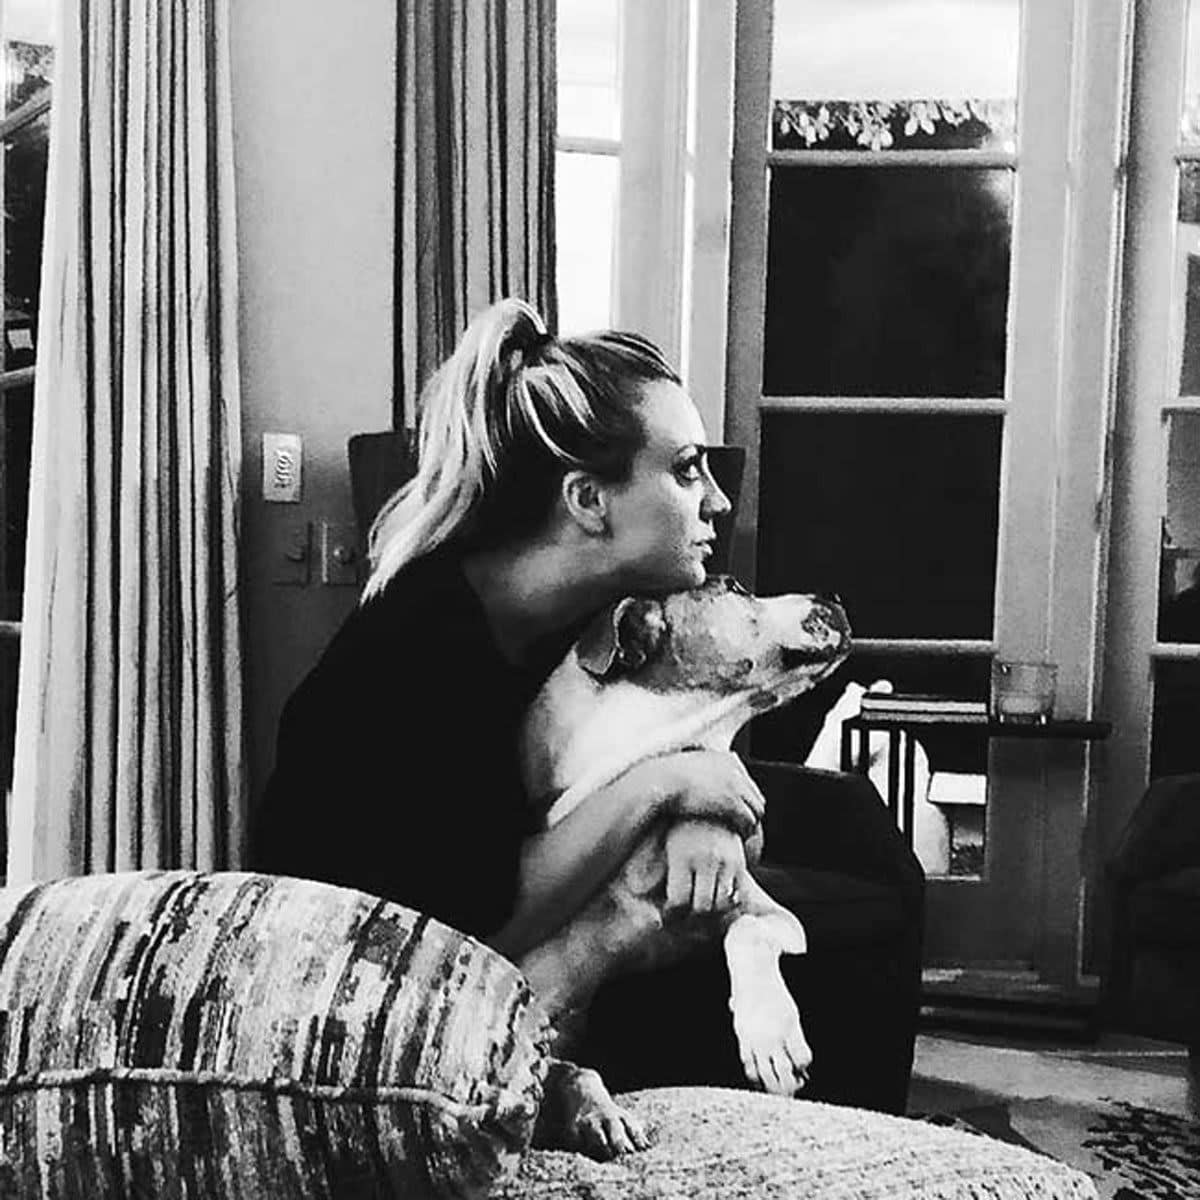 Kaley Cuoco and her inspiration, Norman